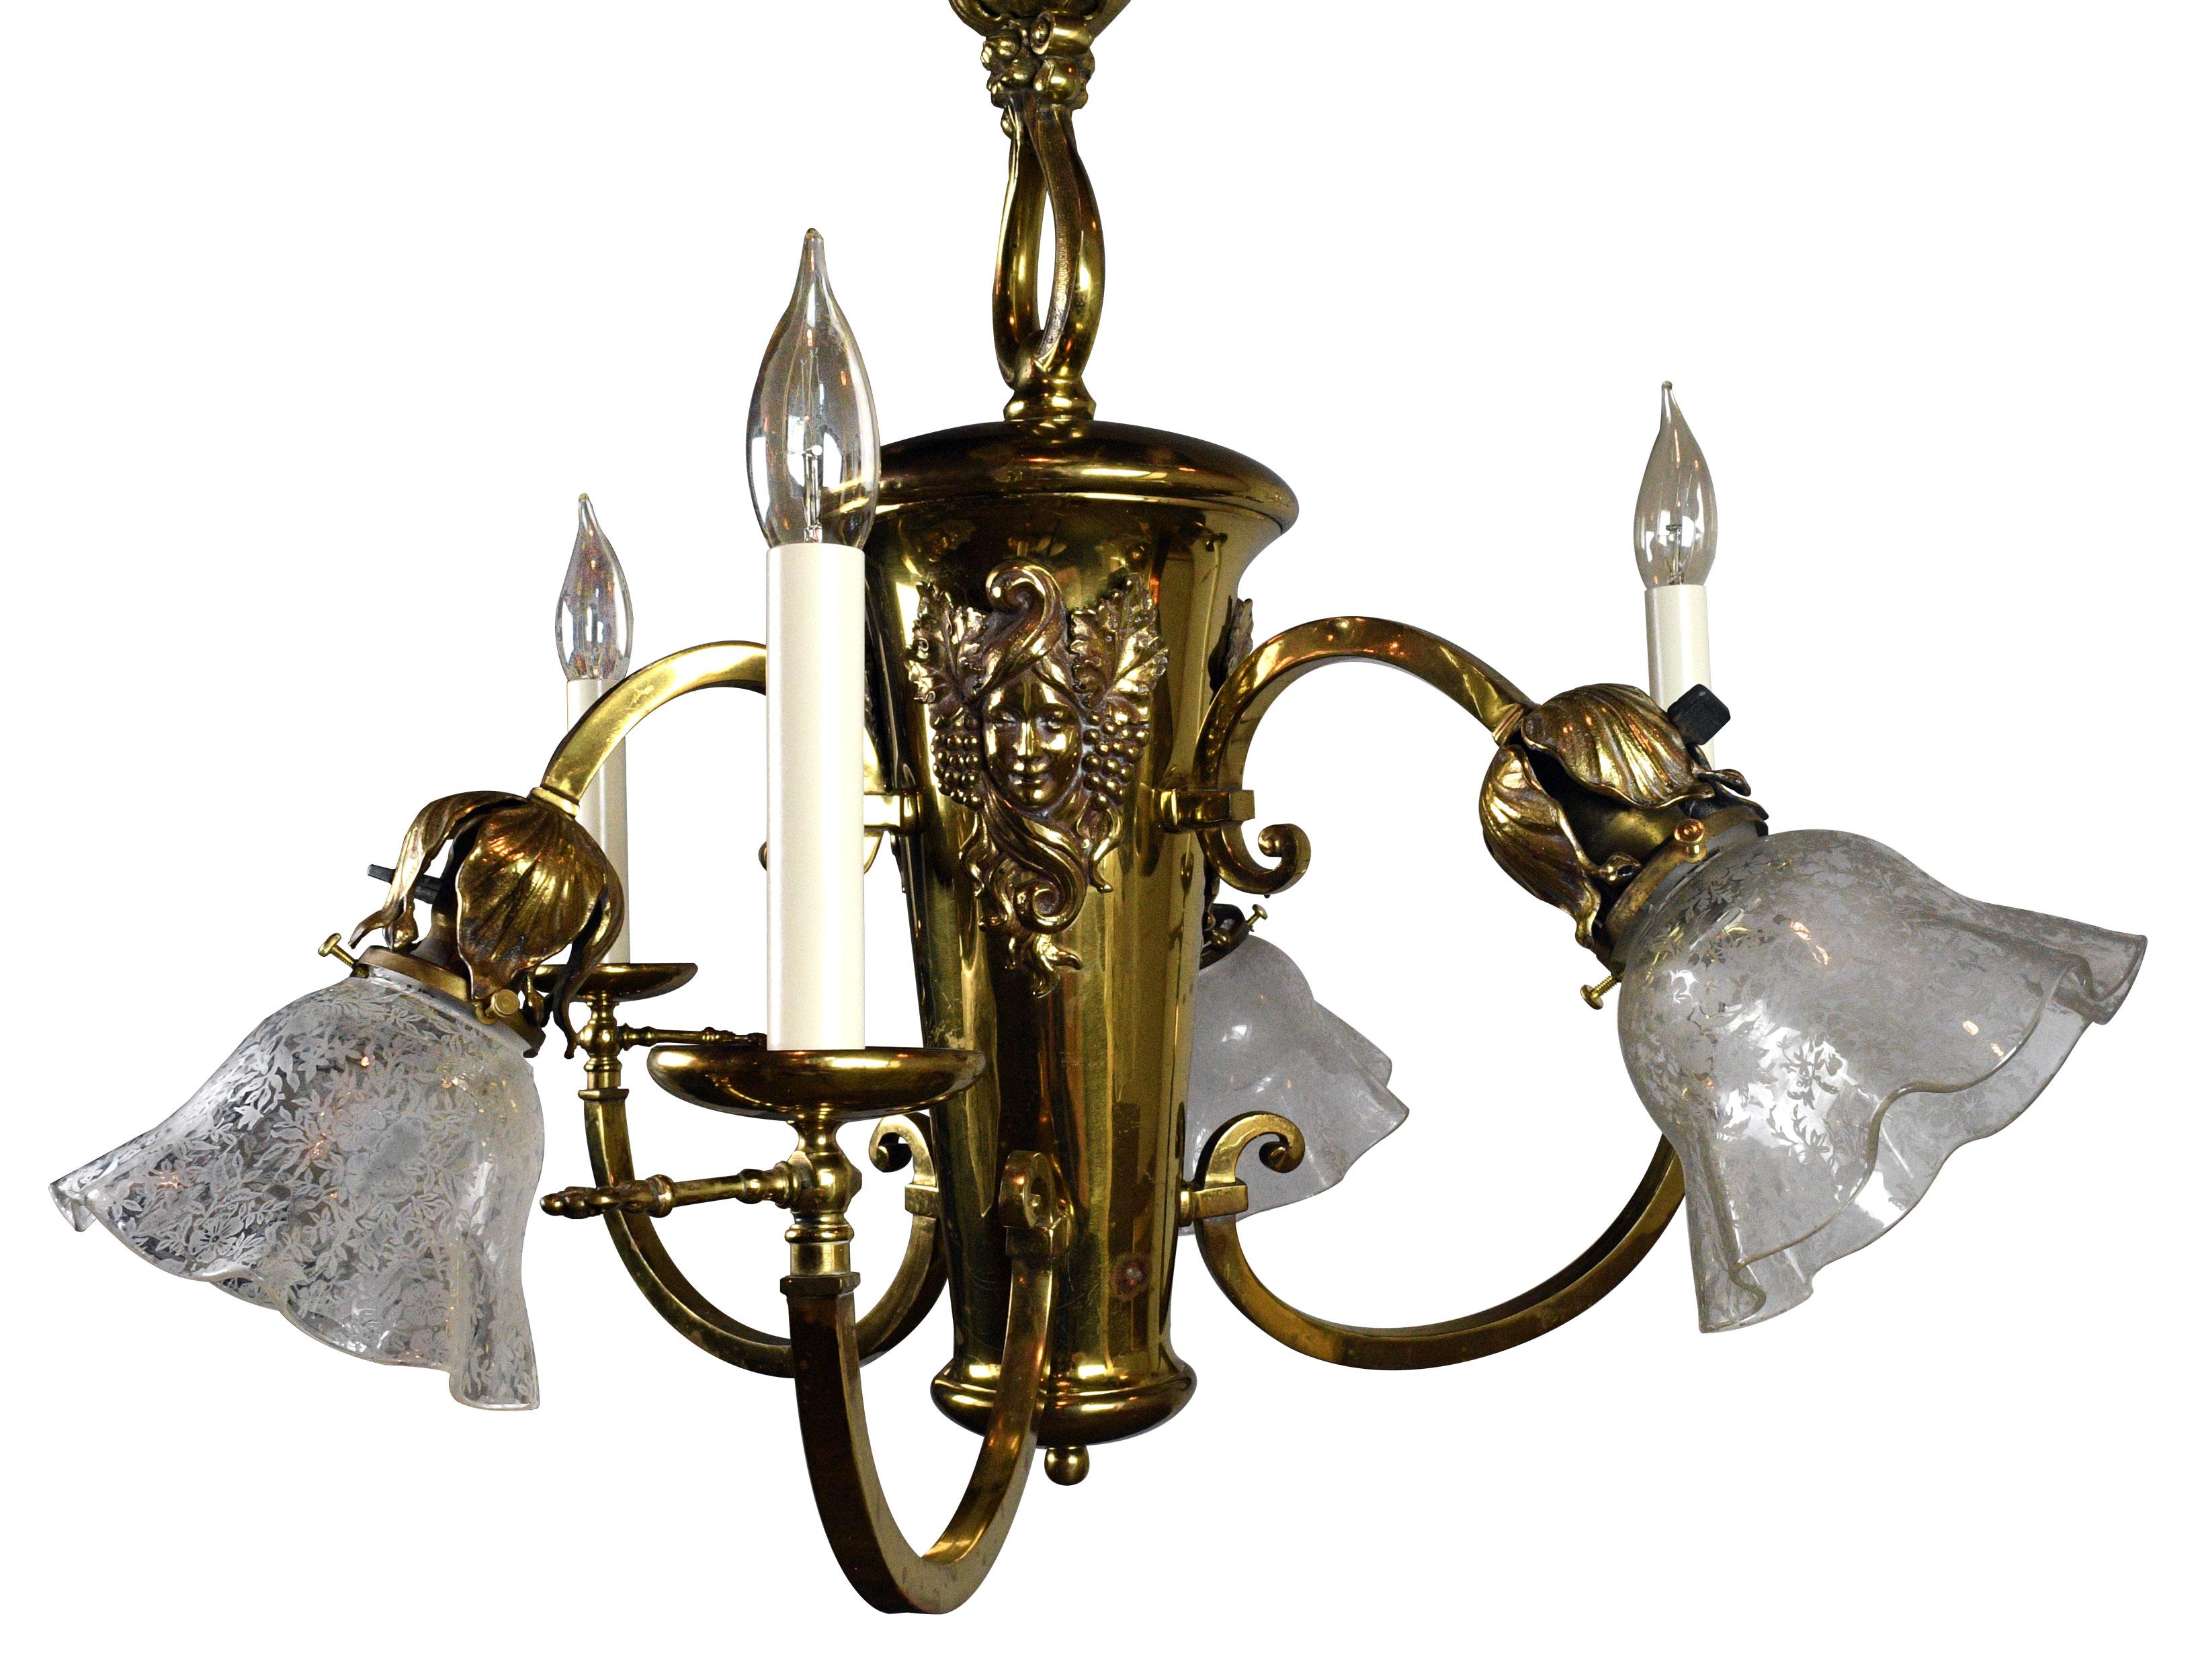 Brass chandelier with six arms — three with candles and three with shades. The chandelier features three cameos surrounded by grapes and leaves while the shades feature a delicate floral and leaf pattern. Formerly a gas/electric fixture, it still